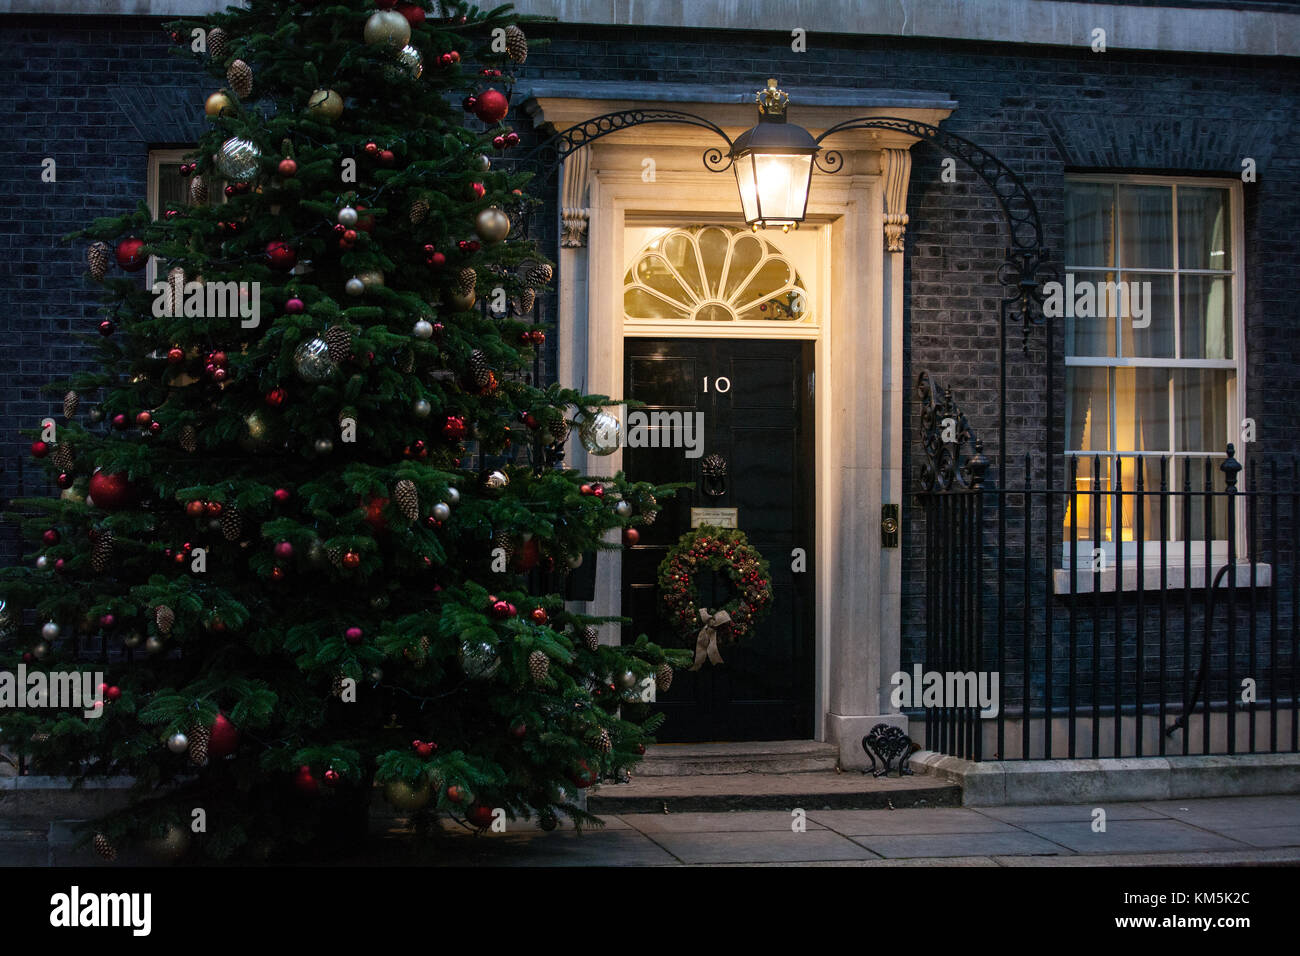 London, UK. 4th December, 2017. A traditional decorated Christmas tree and wreath outside the door of 10 Downing Street. Credit: Mark Kerrison/Alamy Live News Stock Photo